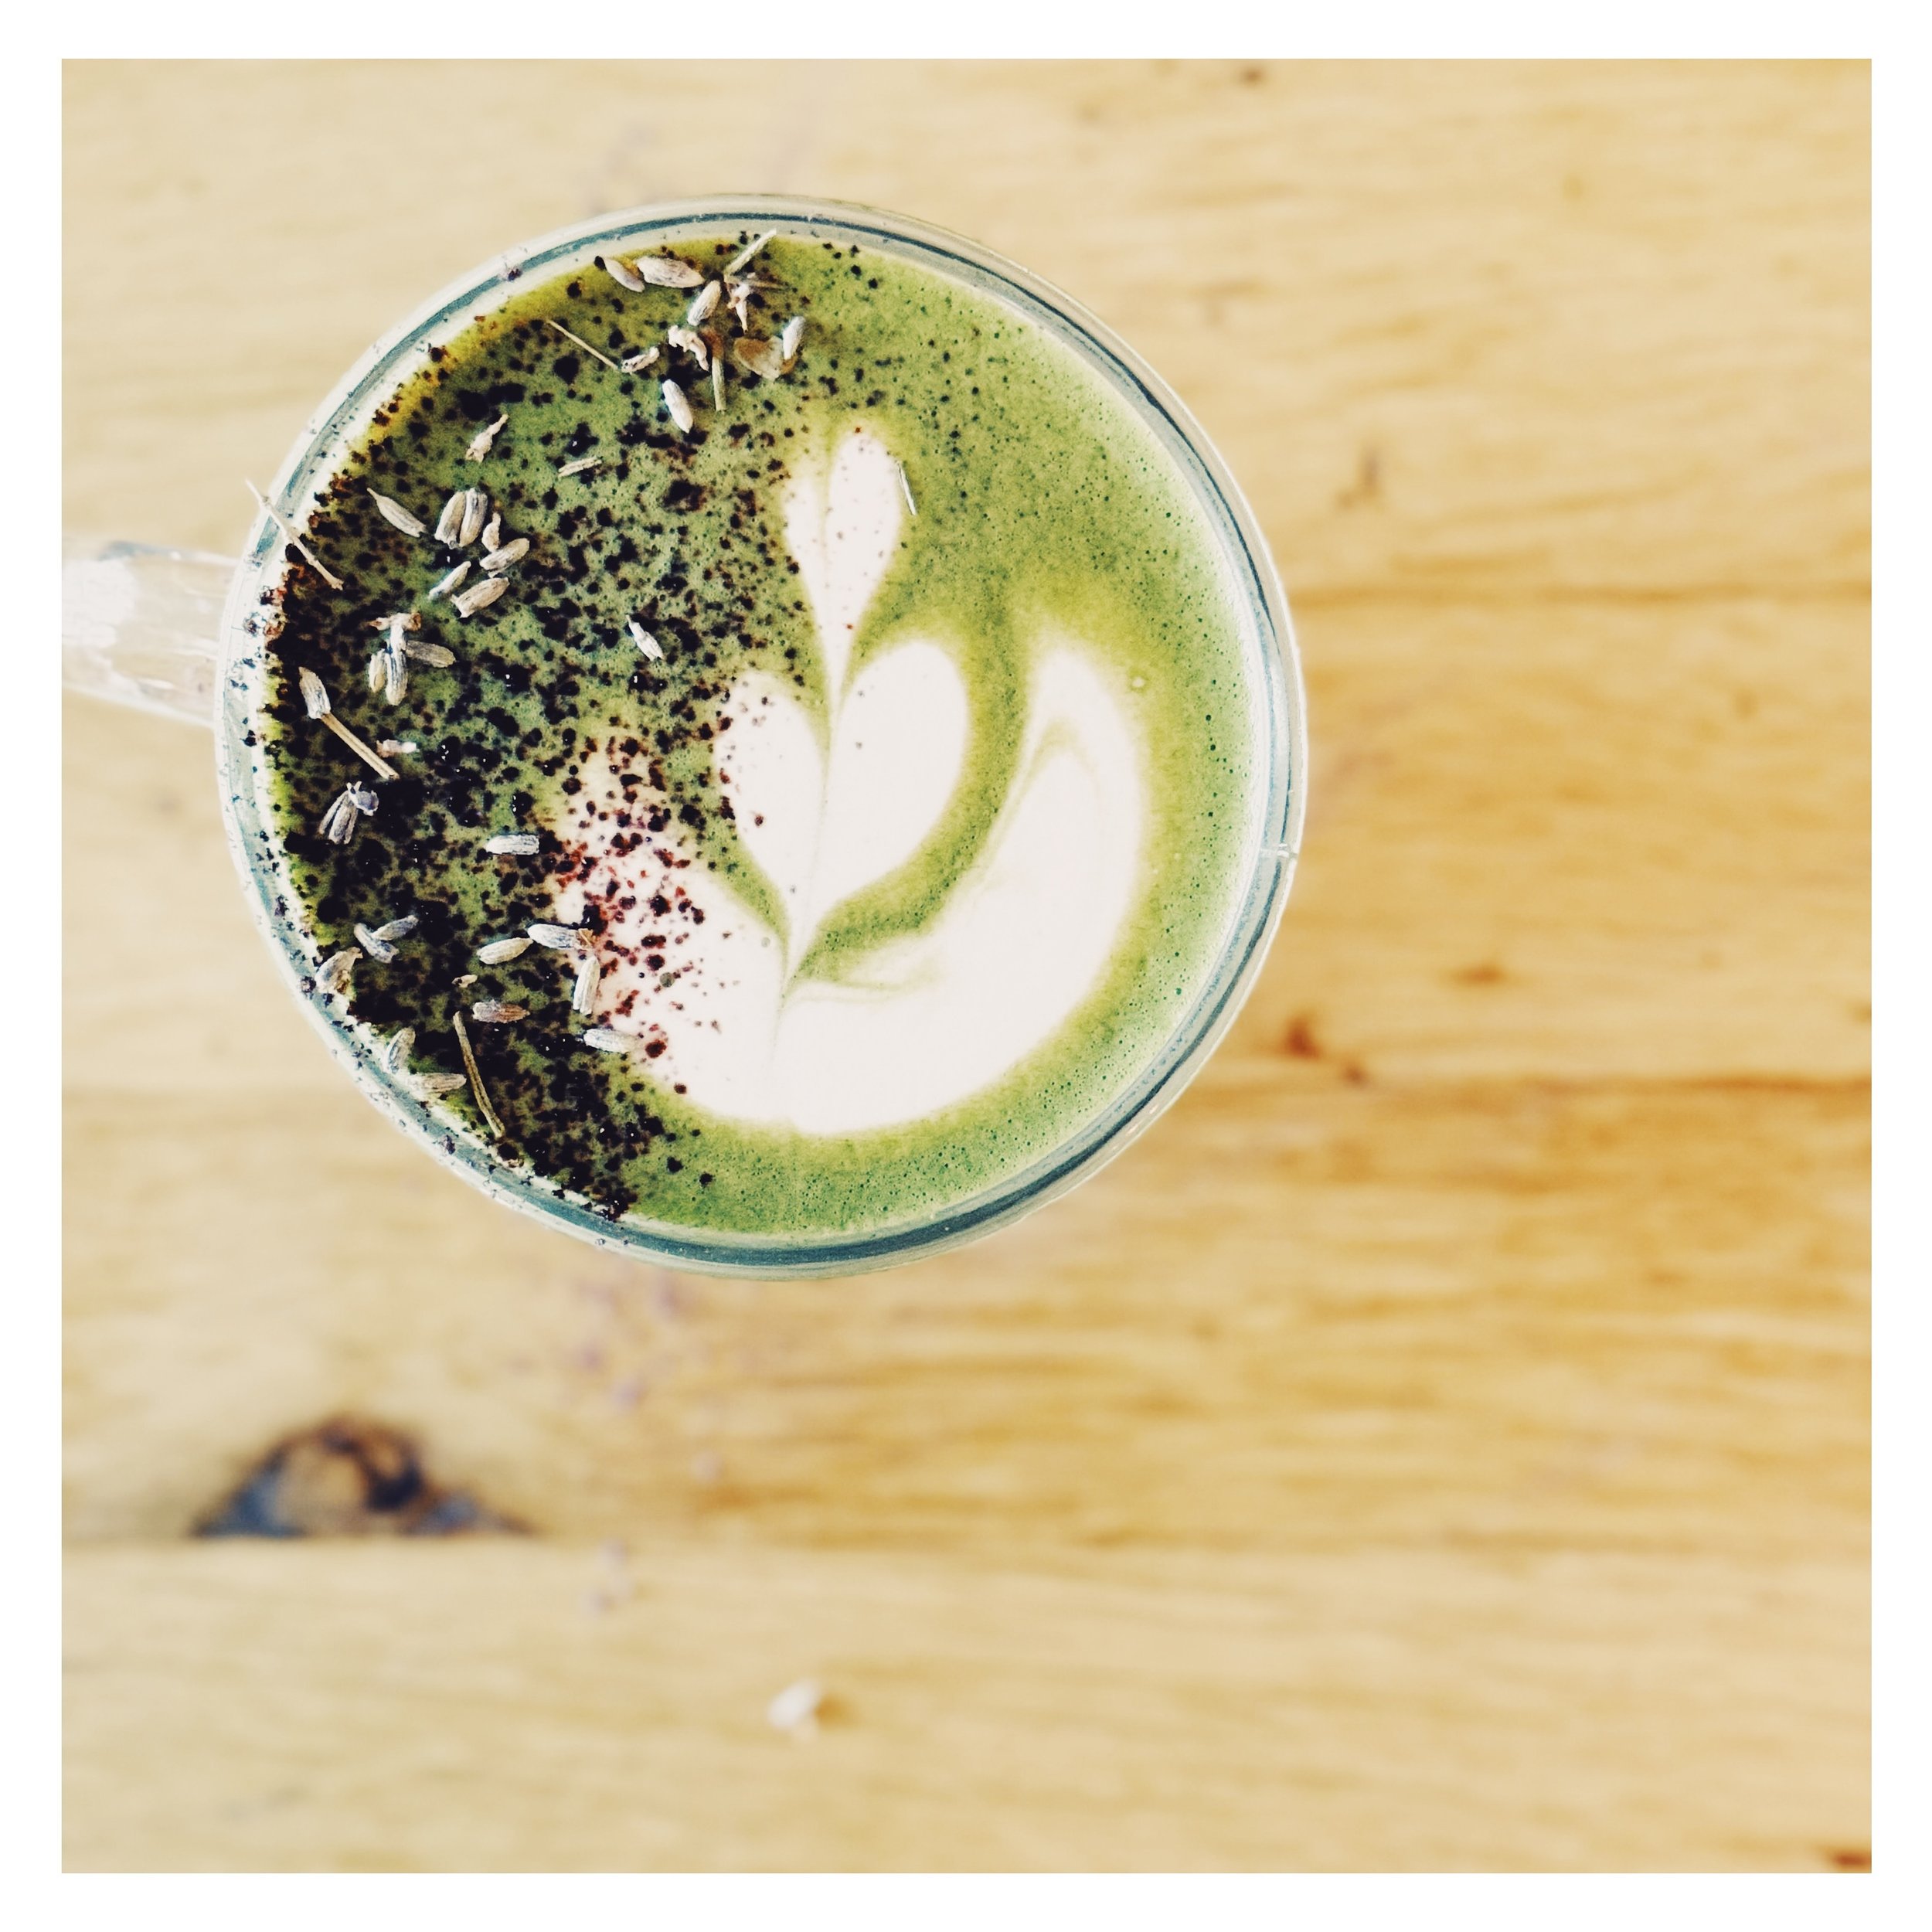 Our lavender matcha latte is tranquility in a cup. 💚💜